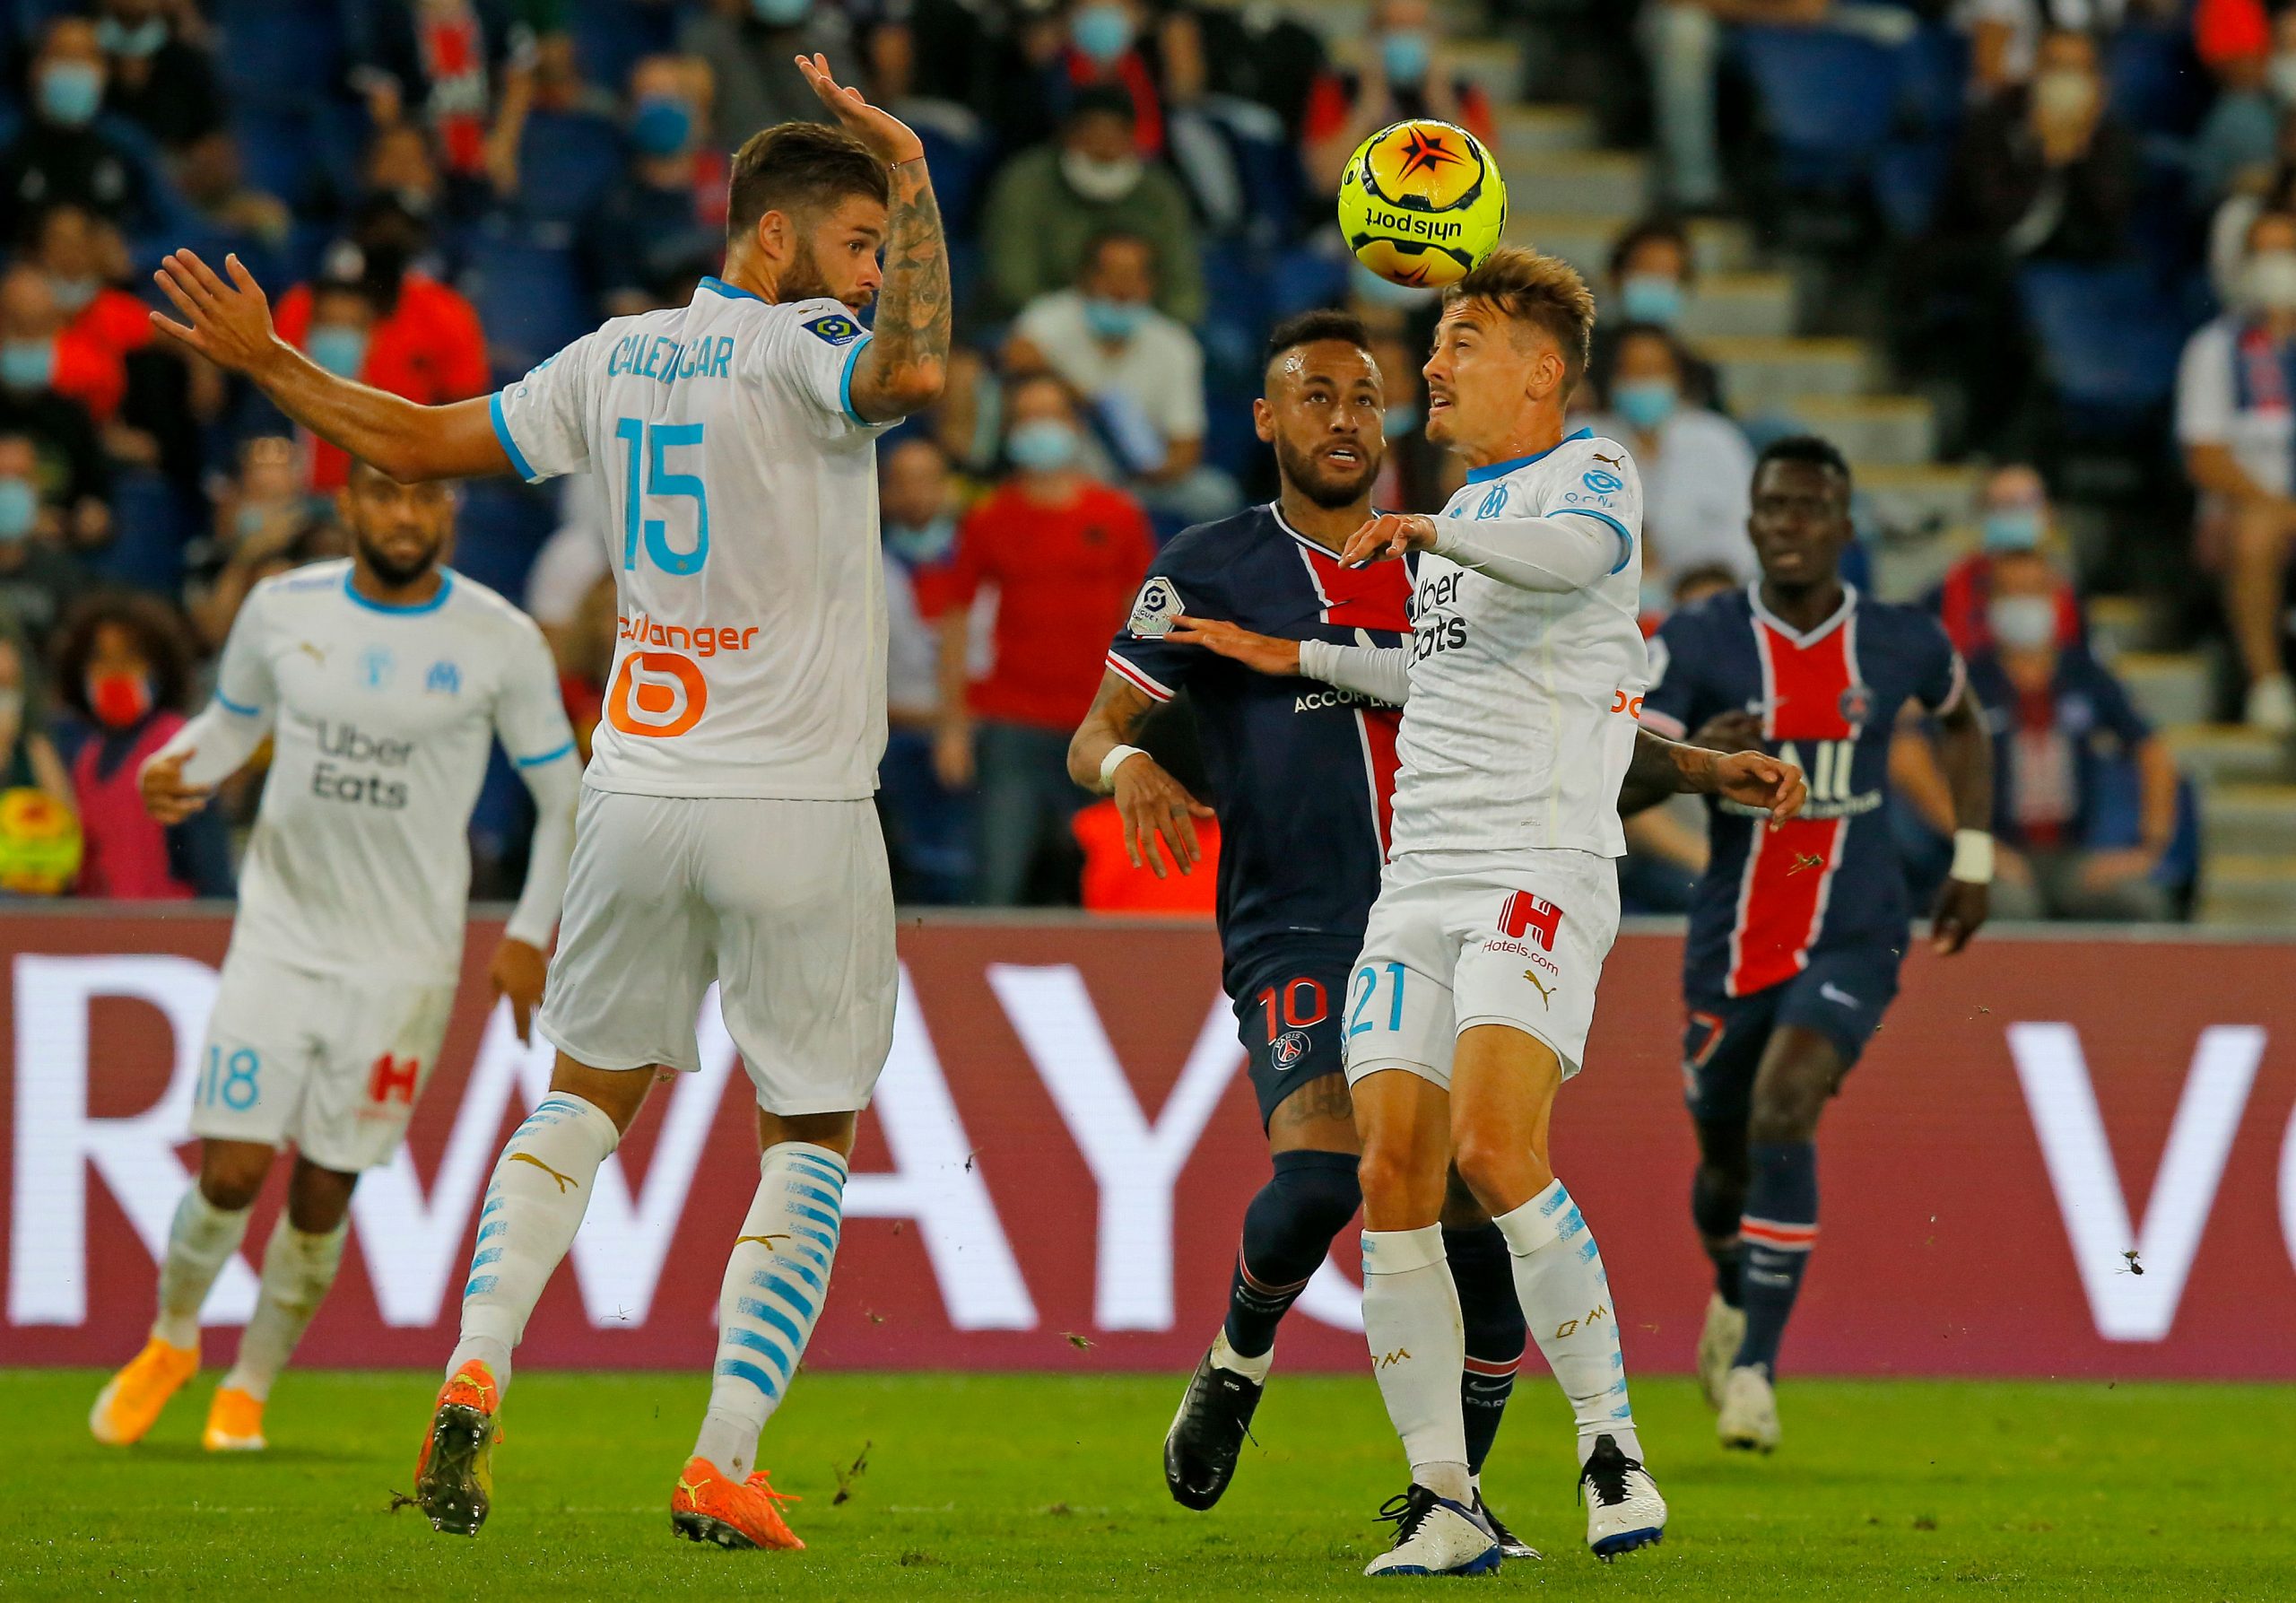 ‘I acted like a fool’: Neymar regrets Marseille red card